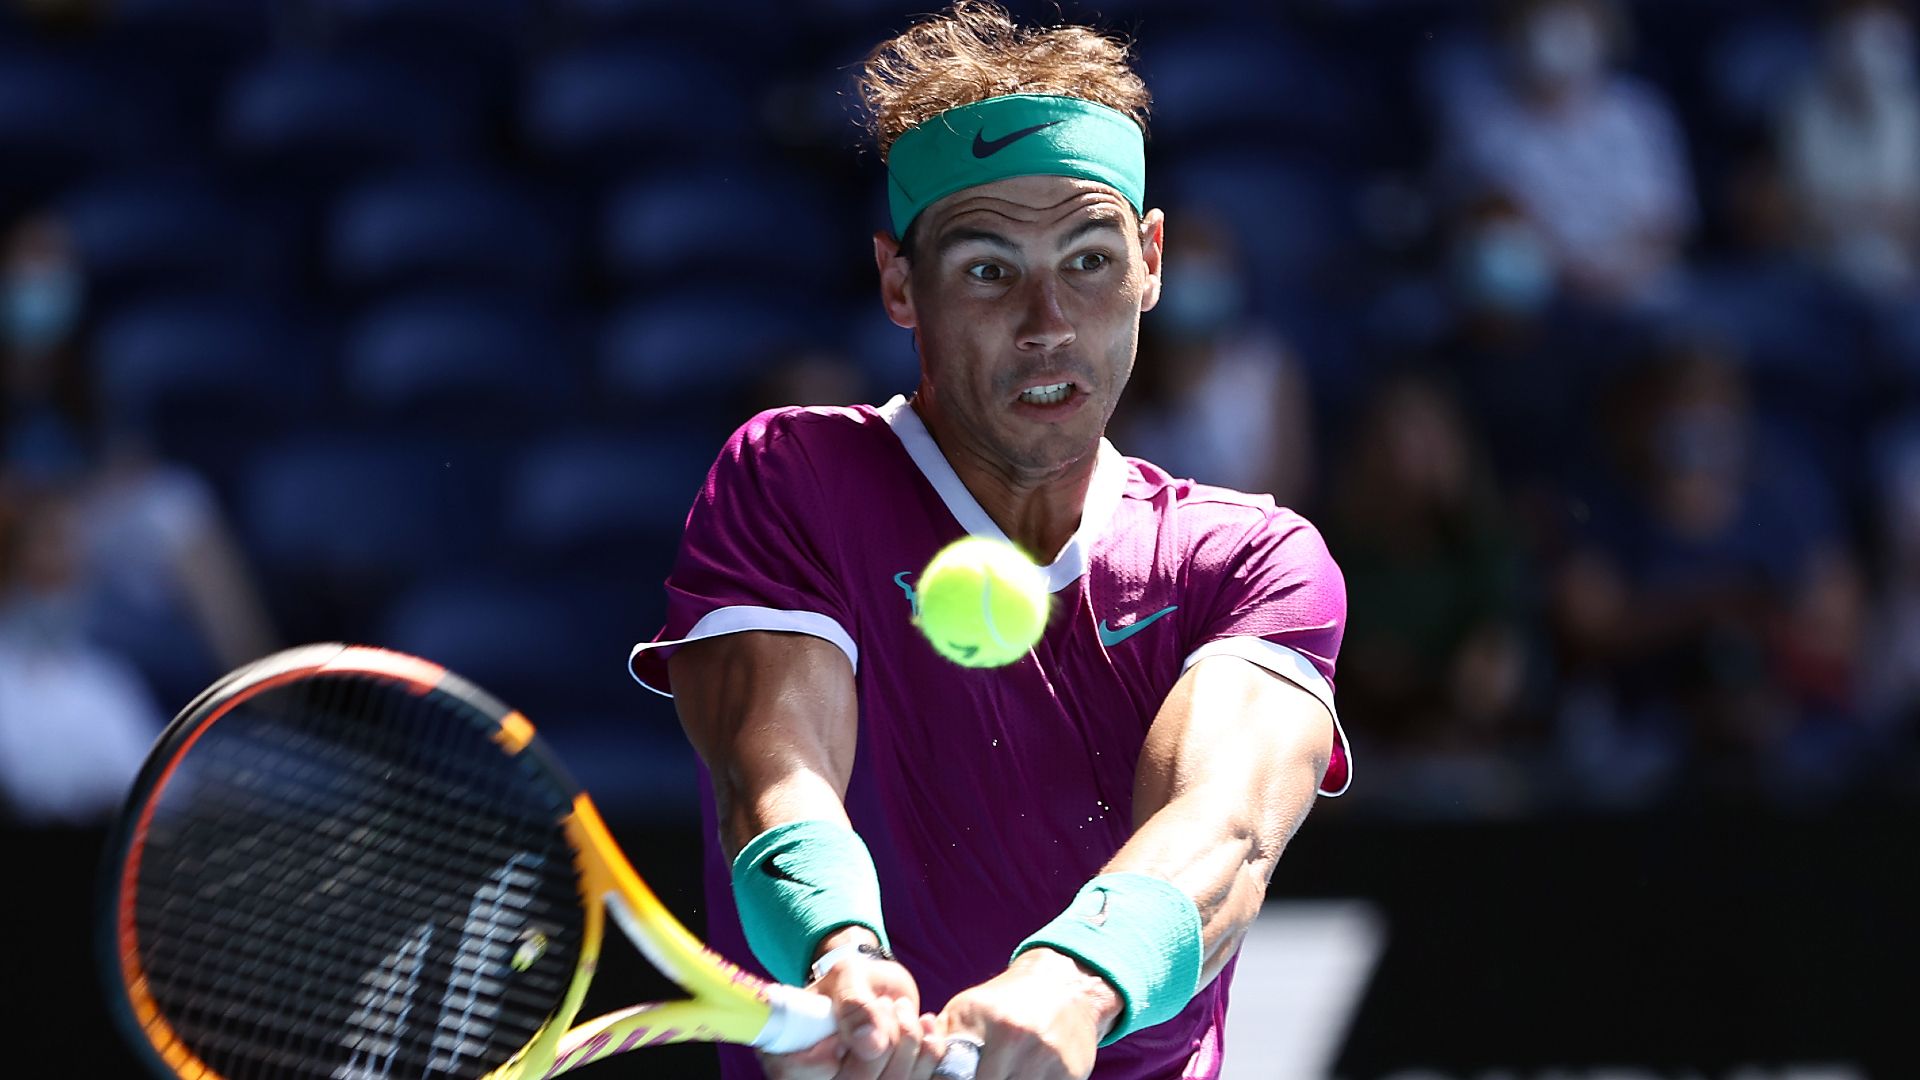 Australian Open: Impressive Nadal outclasses Giron in the first round